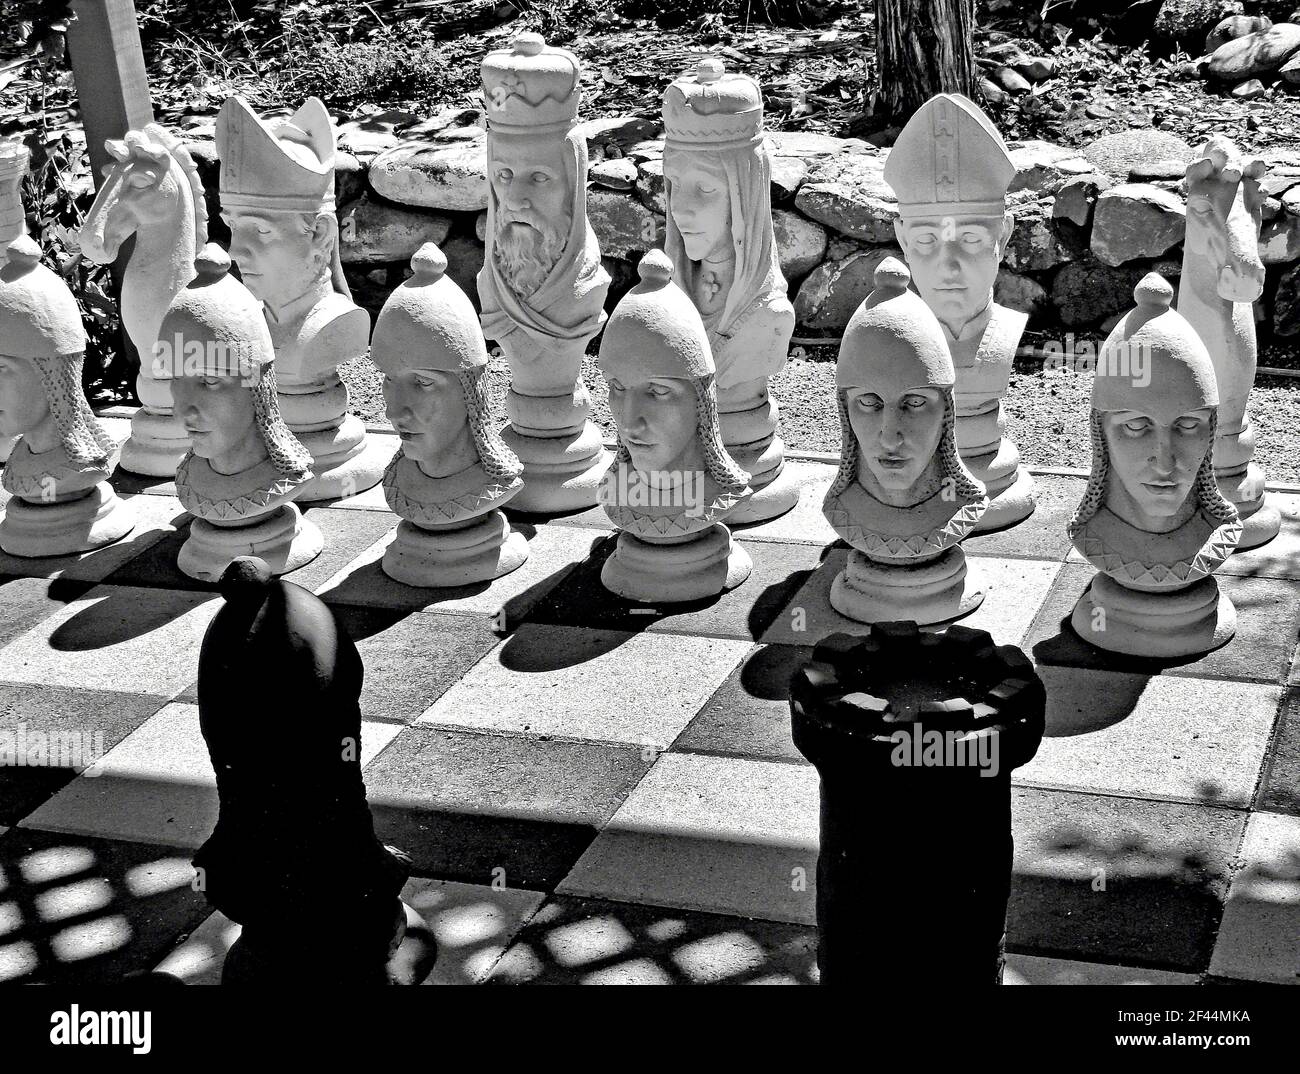 A monochrome closeup shot of white chess pieces with human figures under the sun Stock Photo